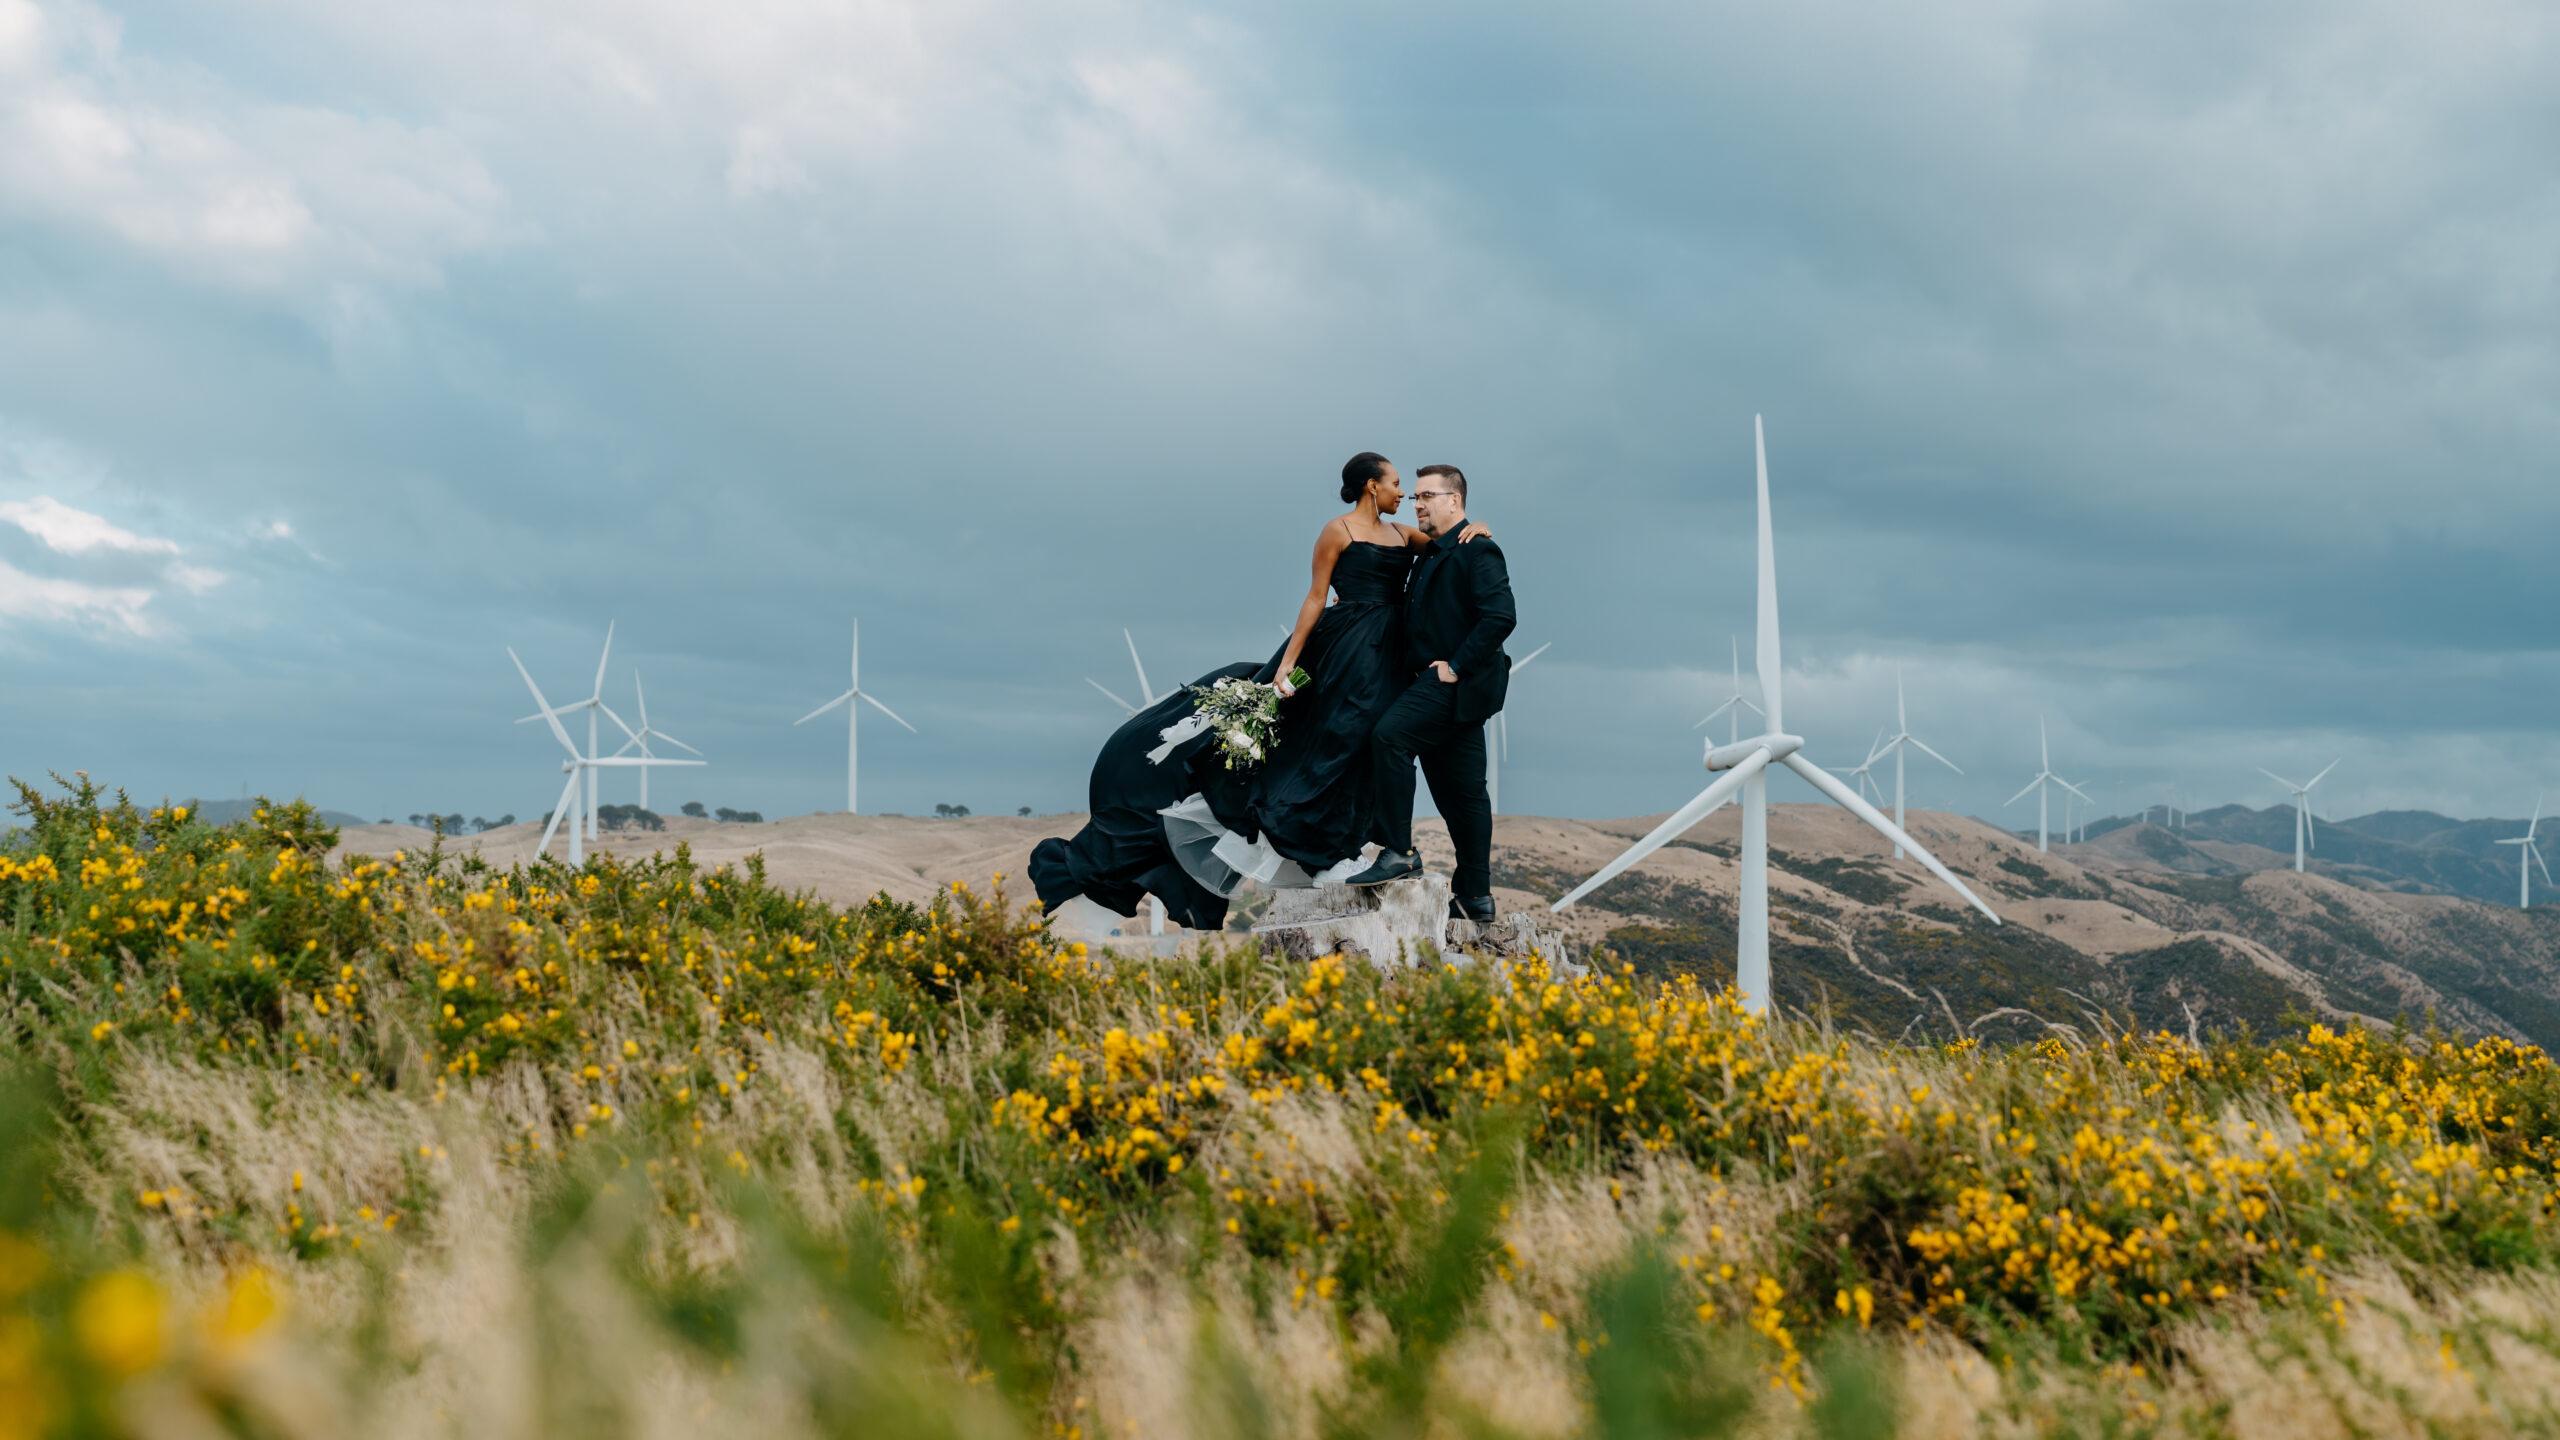 Wedding day photoshoot with Wellington Wind Turbines in the backdrop